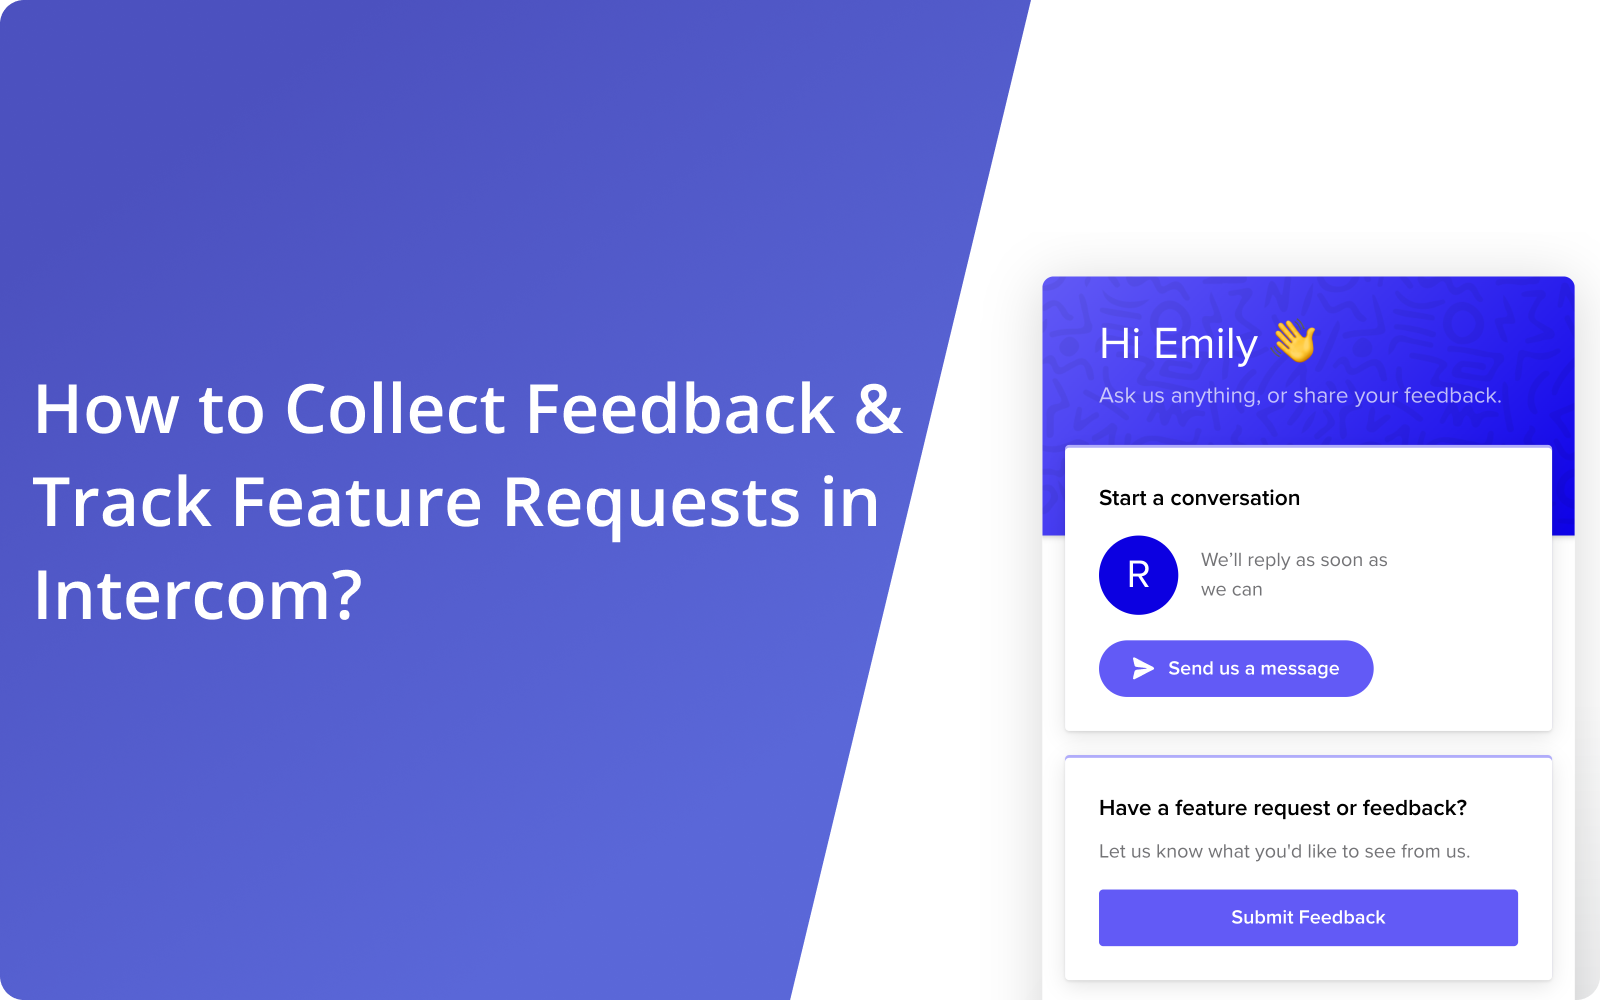 How to Collect Feedback & Track Feature Requests in Intercom